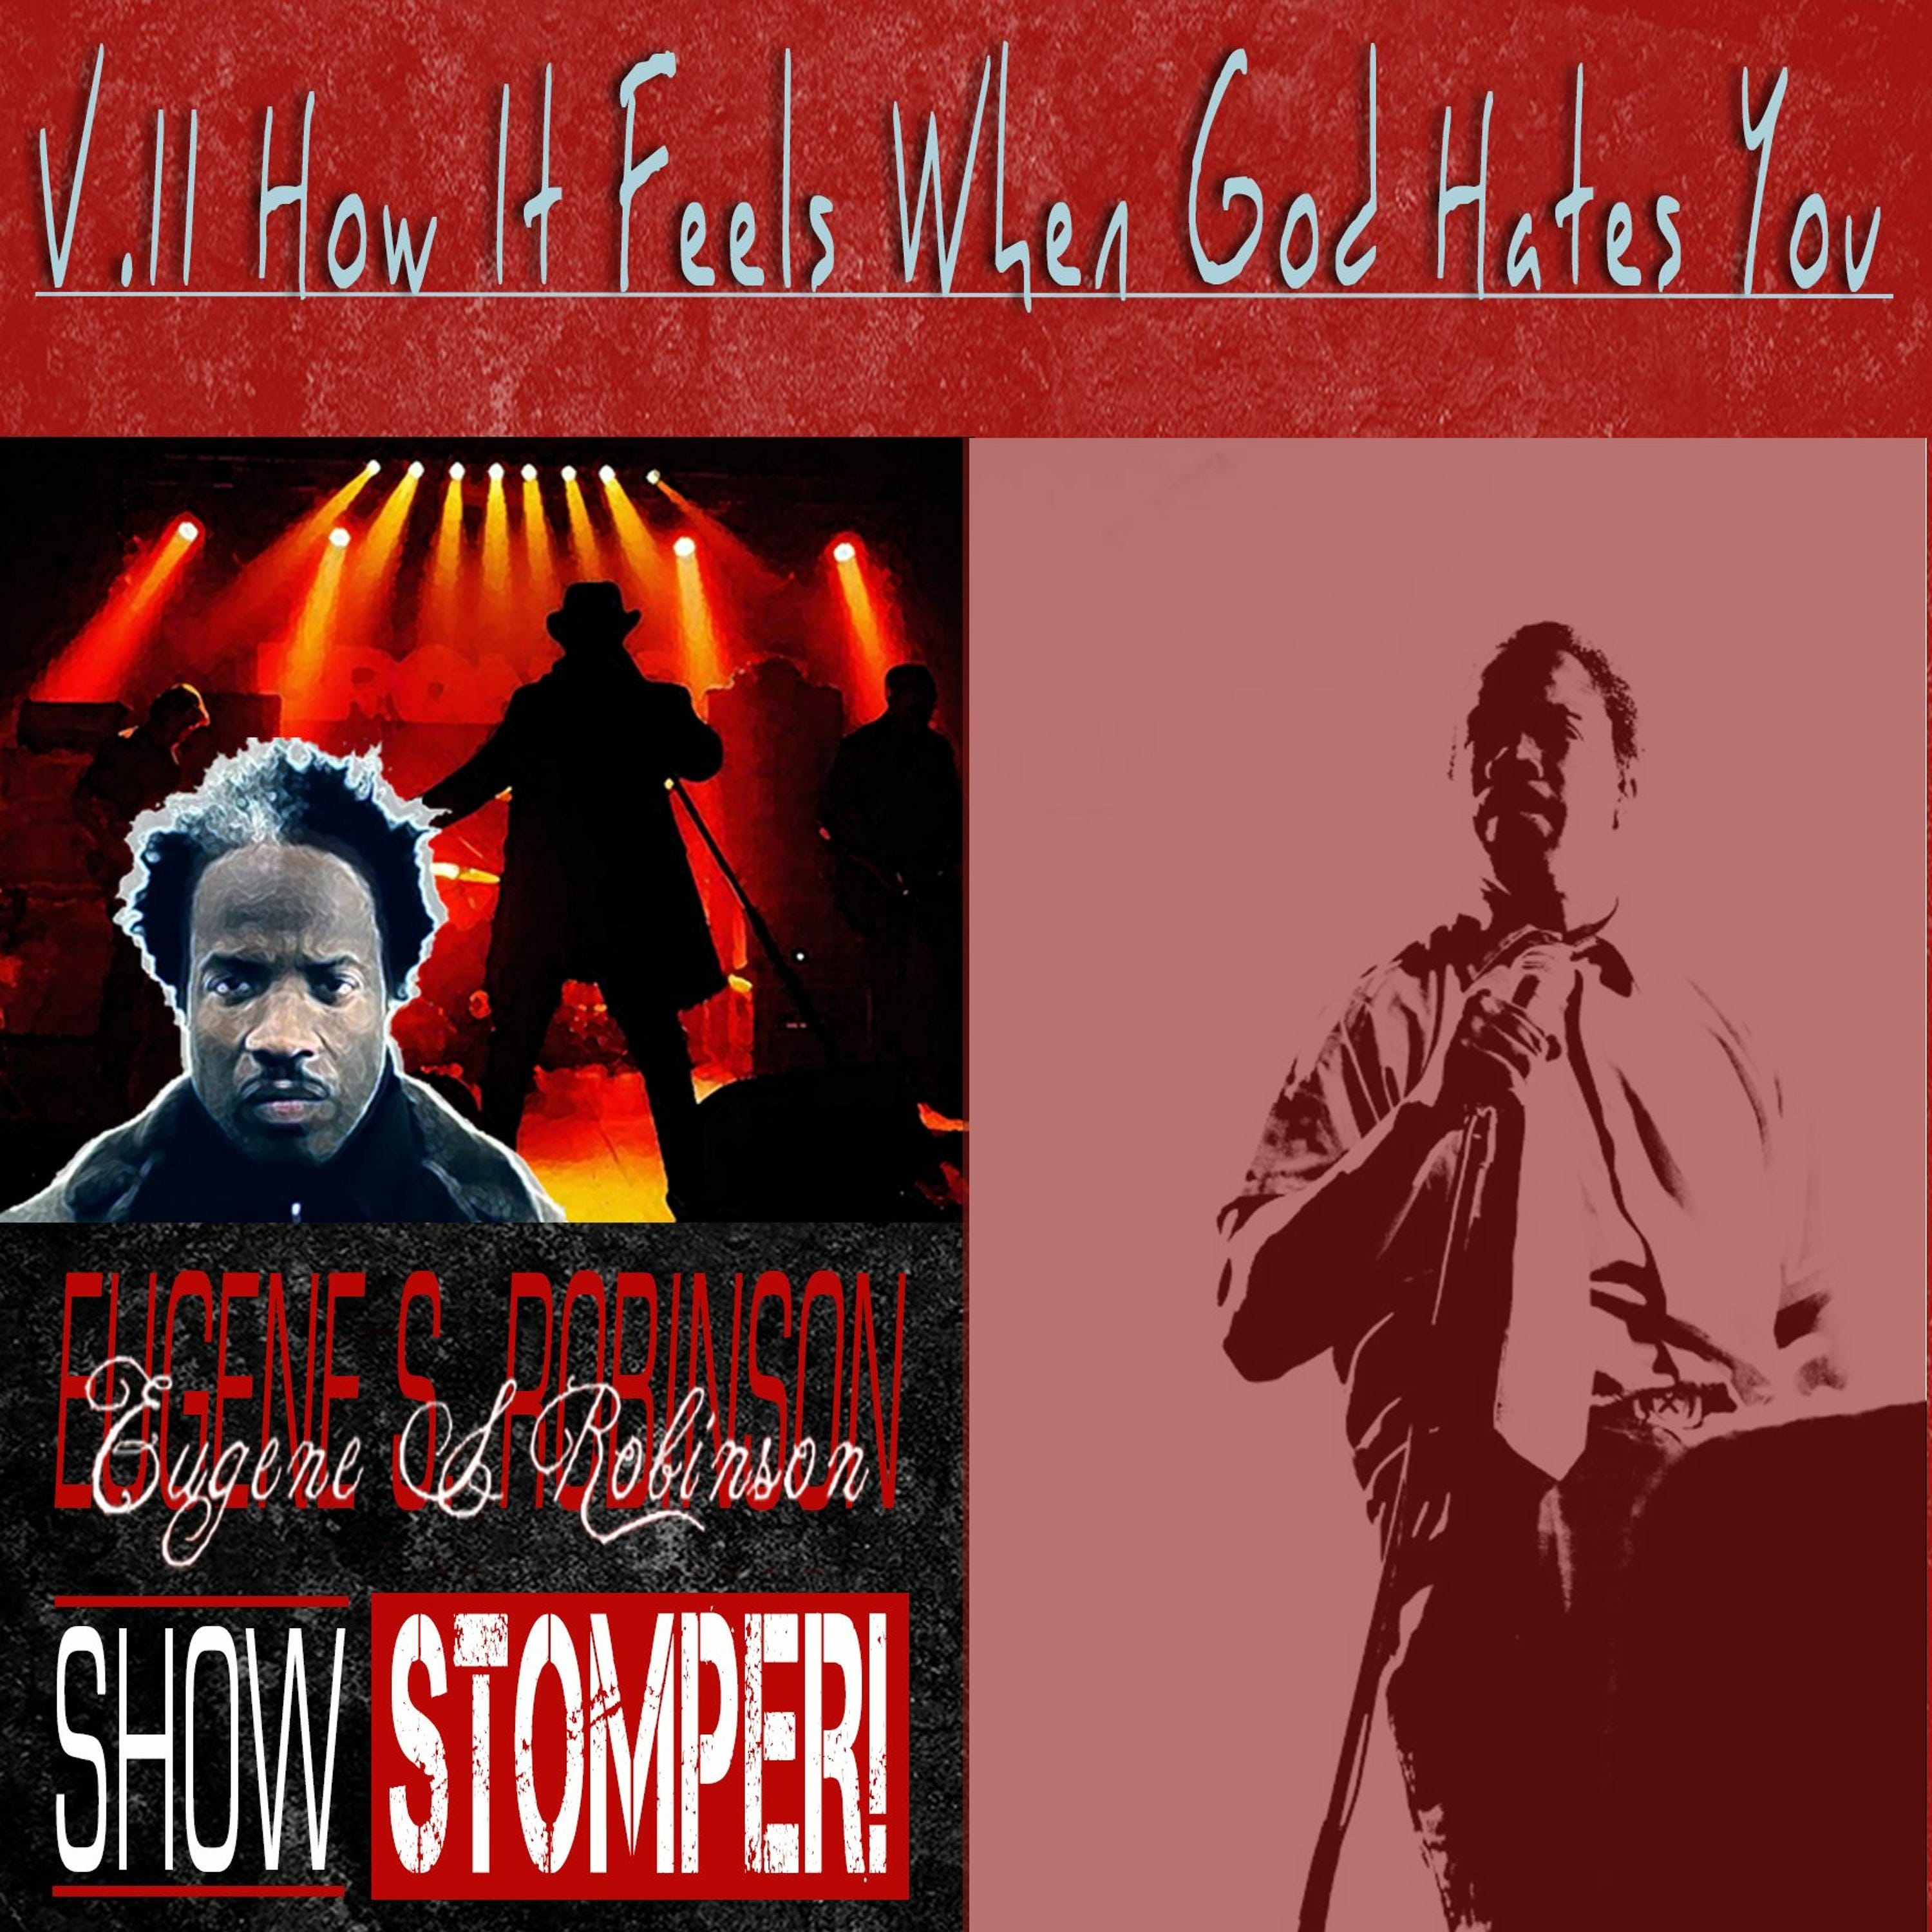 The Eugene S. Robinson Show Stomper! V.11: How It Feels When God Hates You